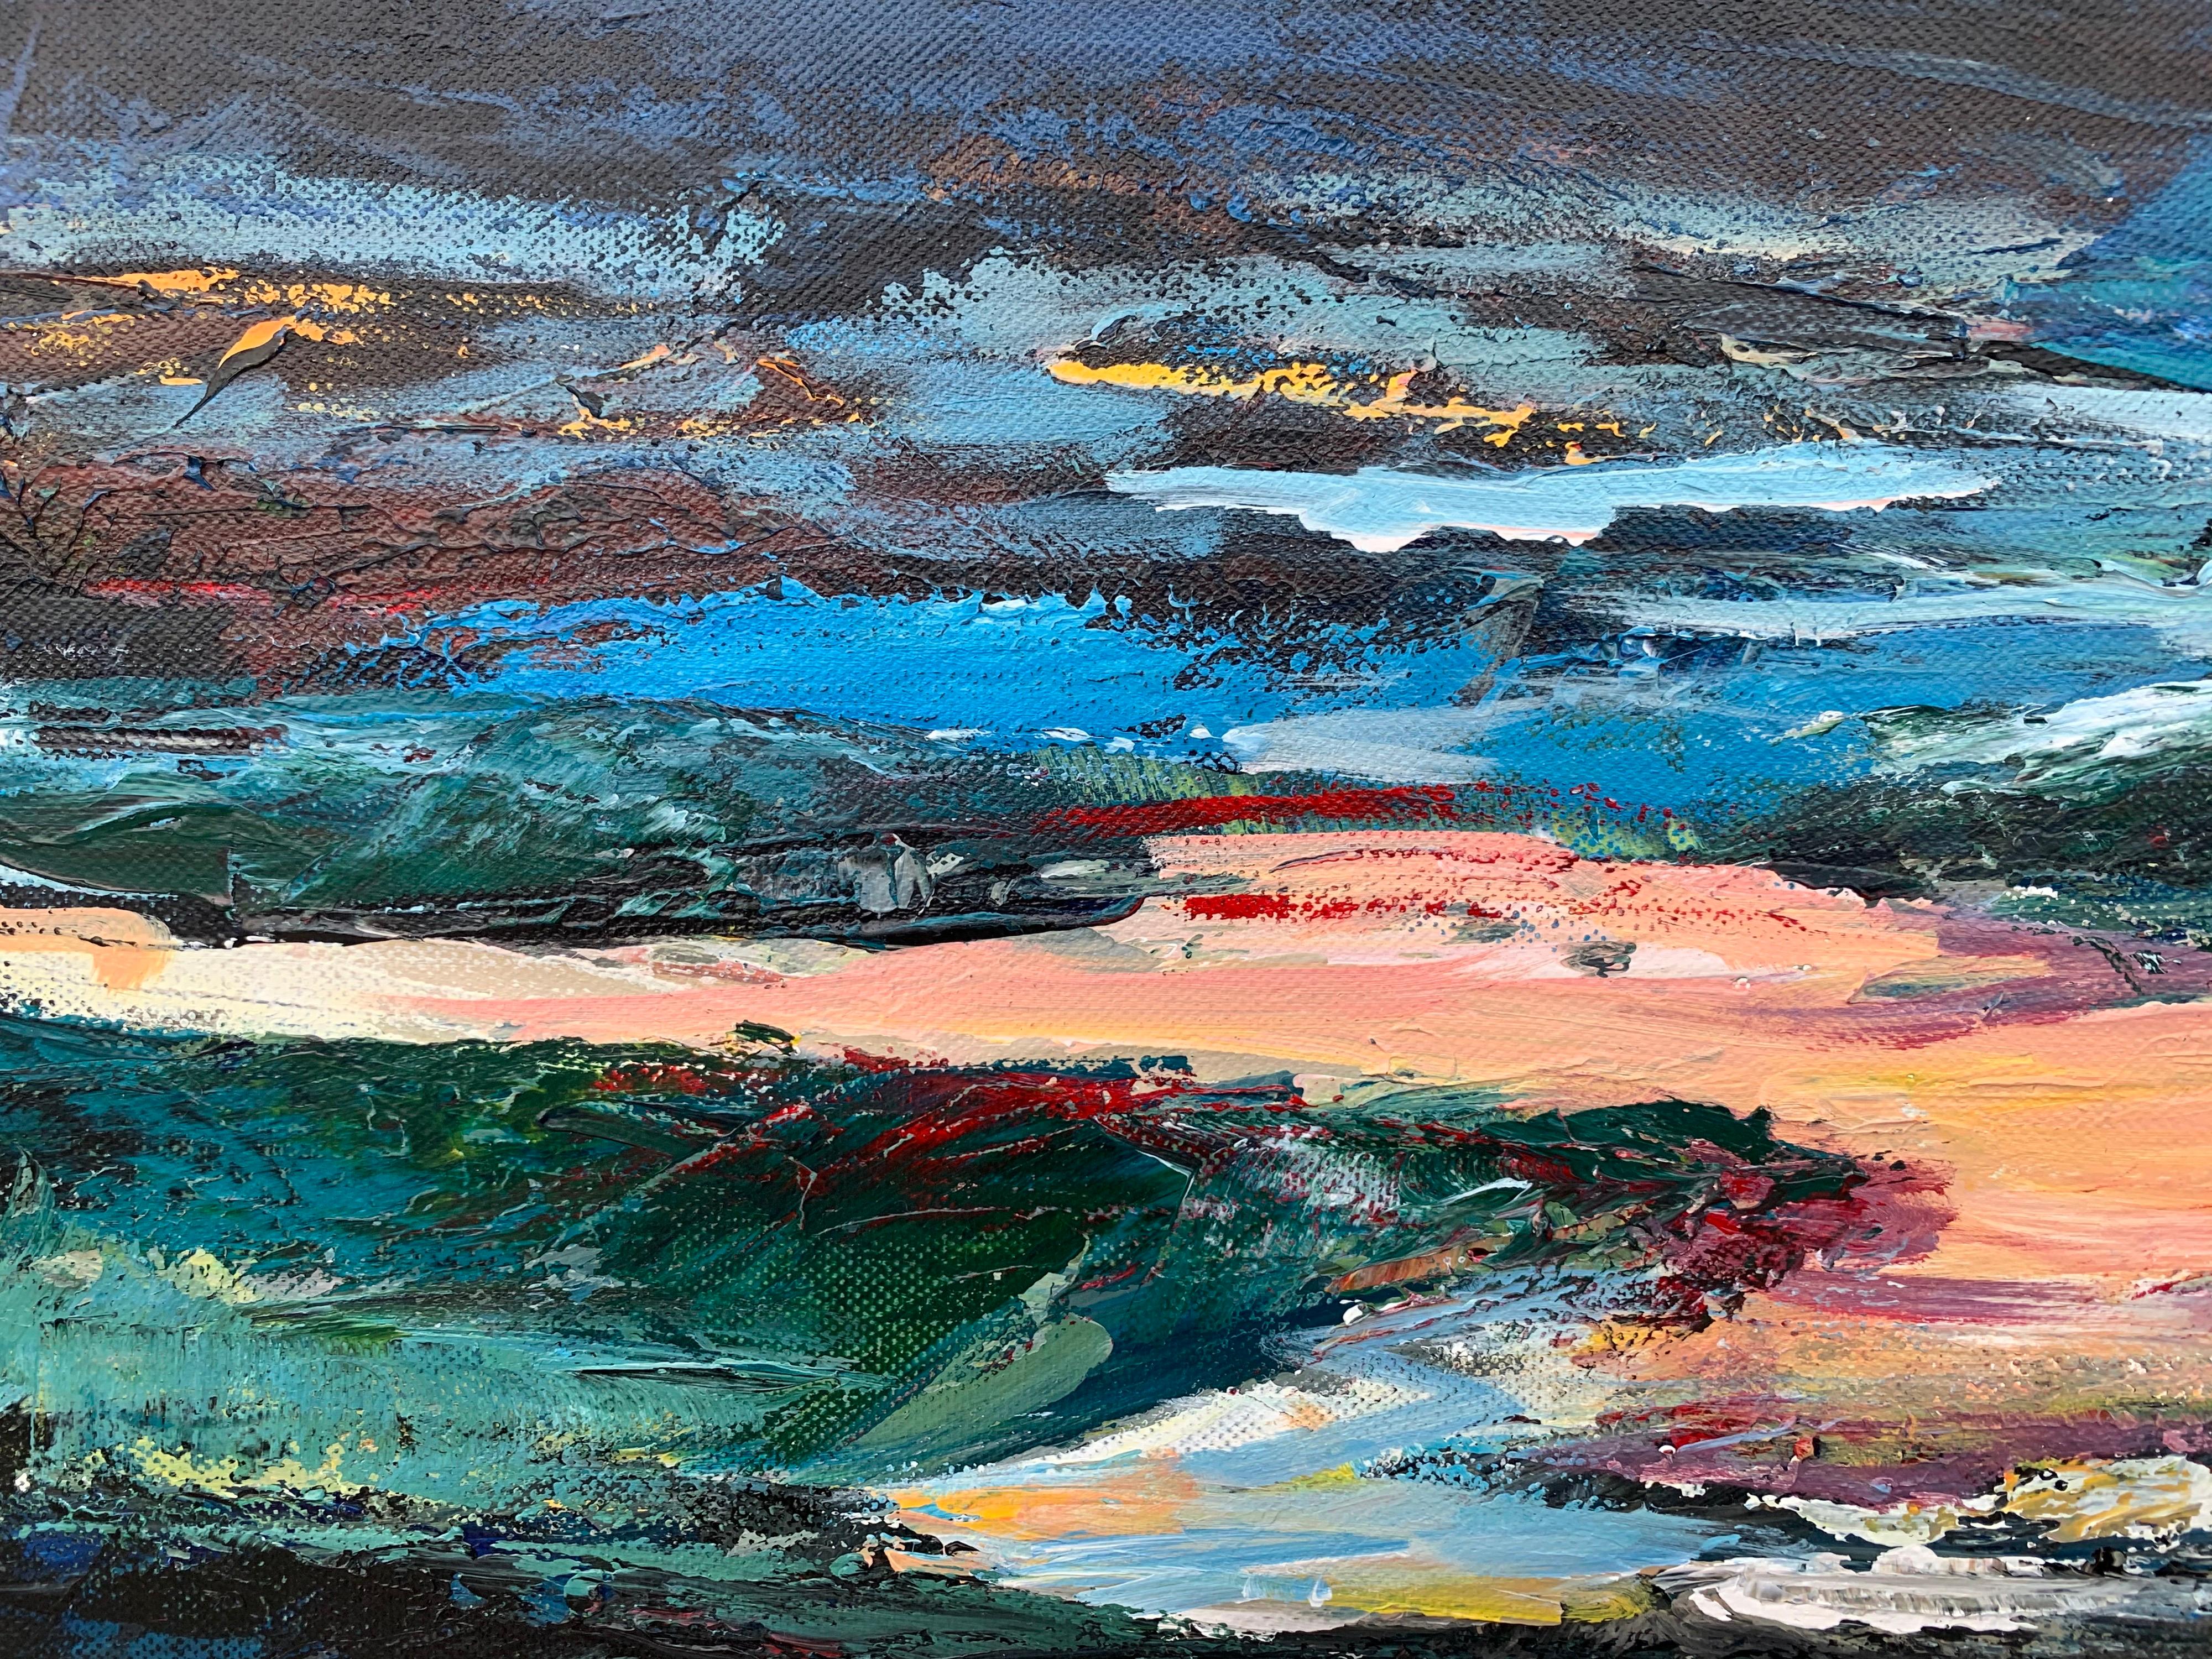 Dark Panoramic Expressive Abstract Mountain Landscape by Contemporary British Artist, Angela Wakefield. 

Art measures 31.5 x 12 inches
Frame measures 37.5 x 18 inches

Angela Wakefield has twice been on the front cover of ‘Art of England’ and